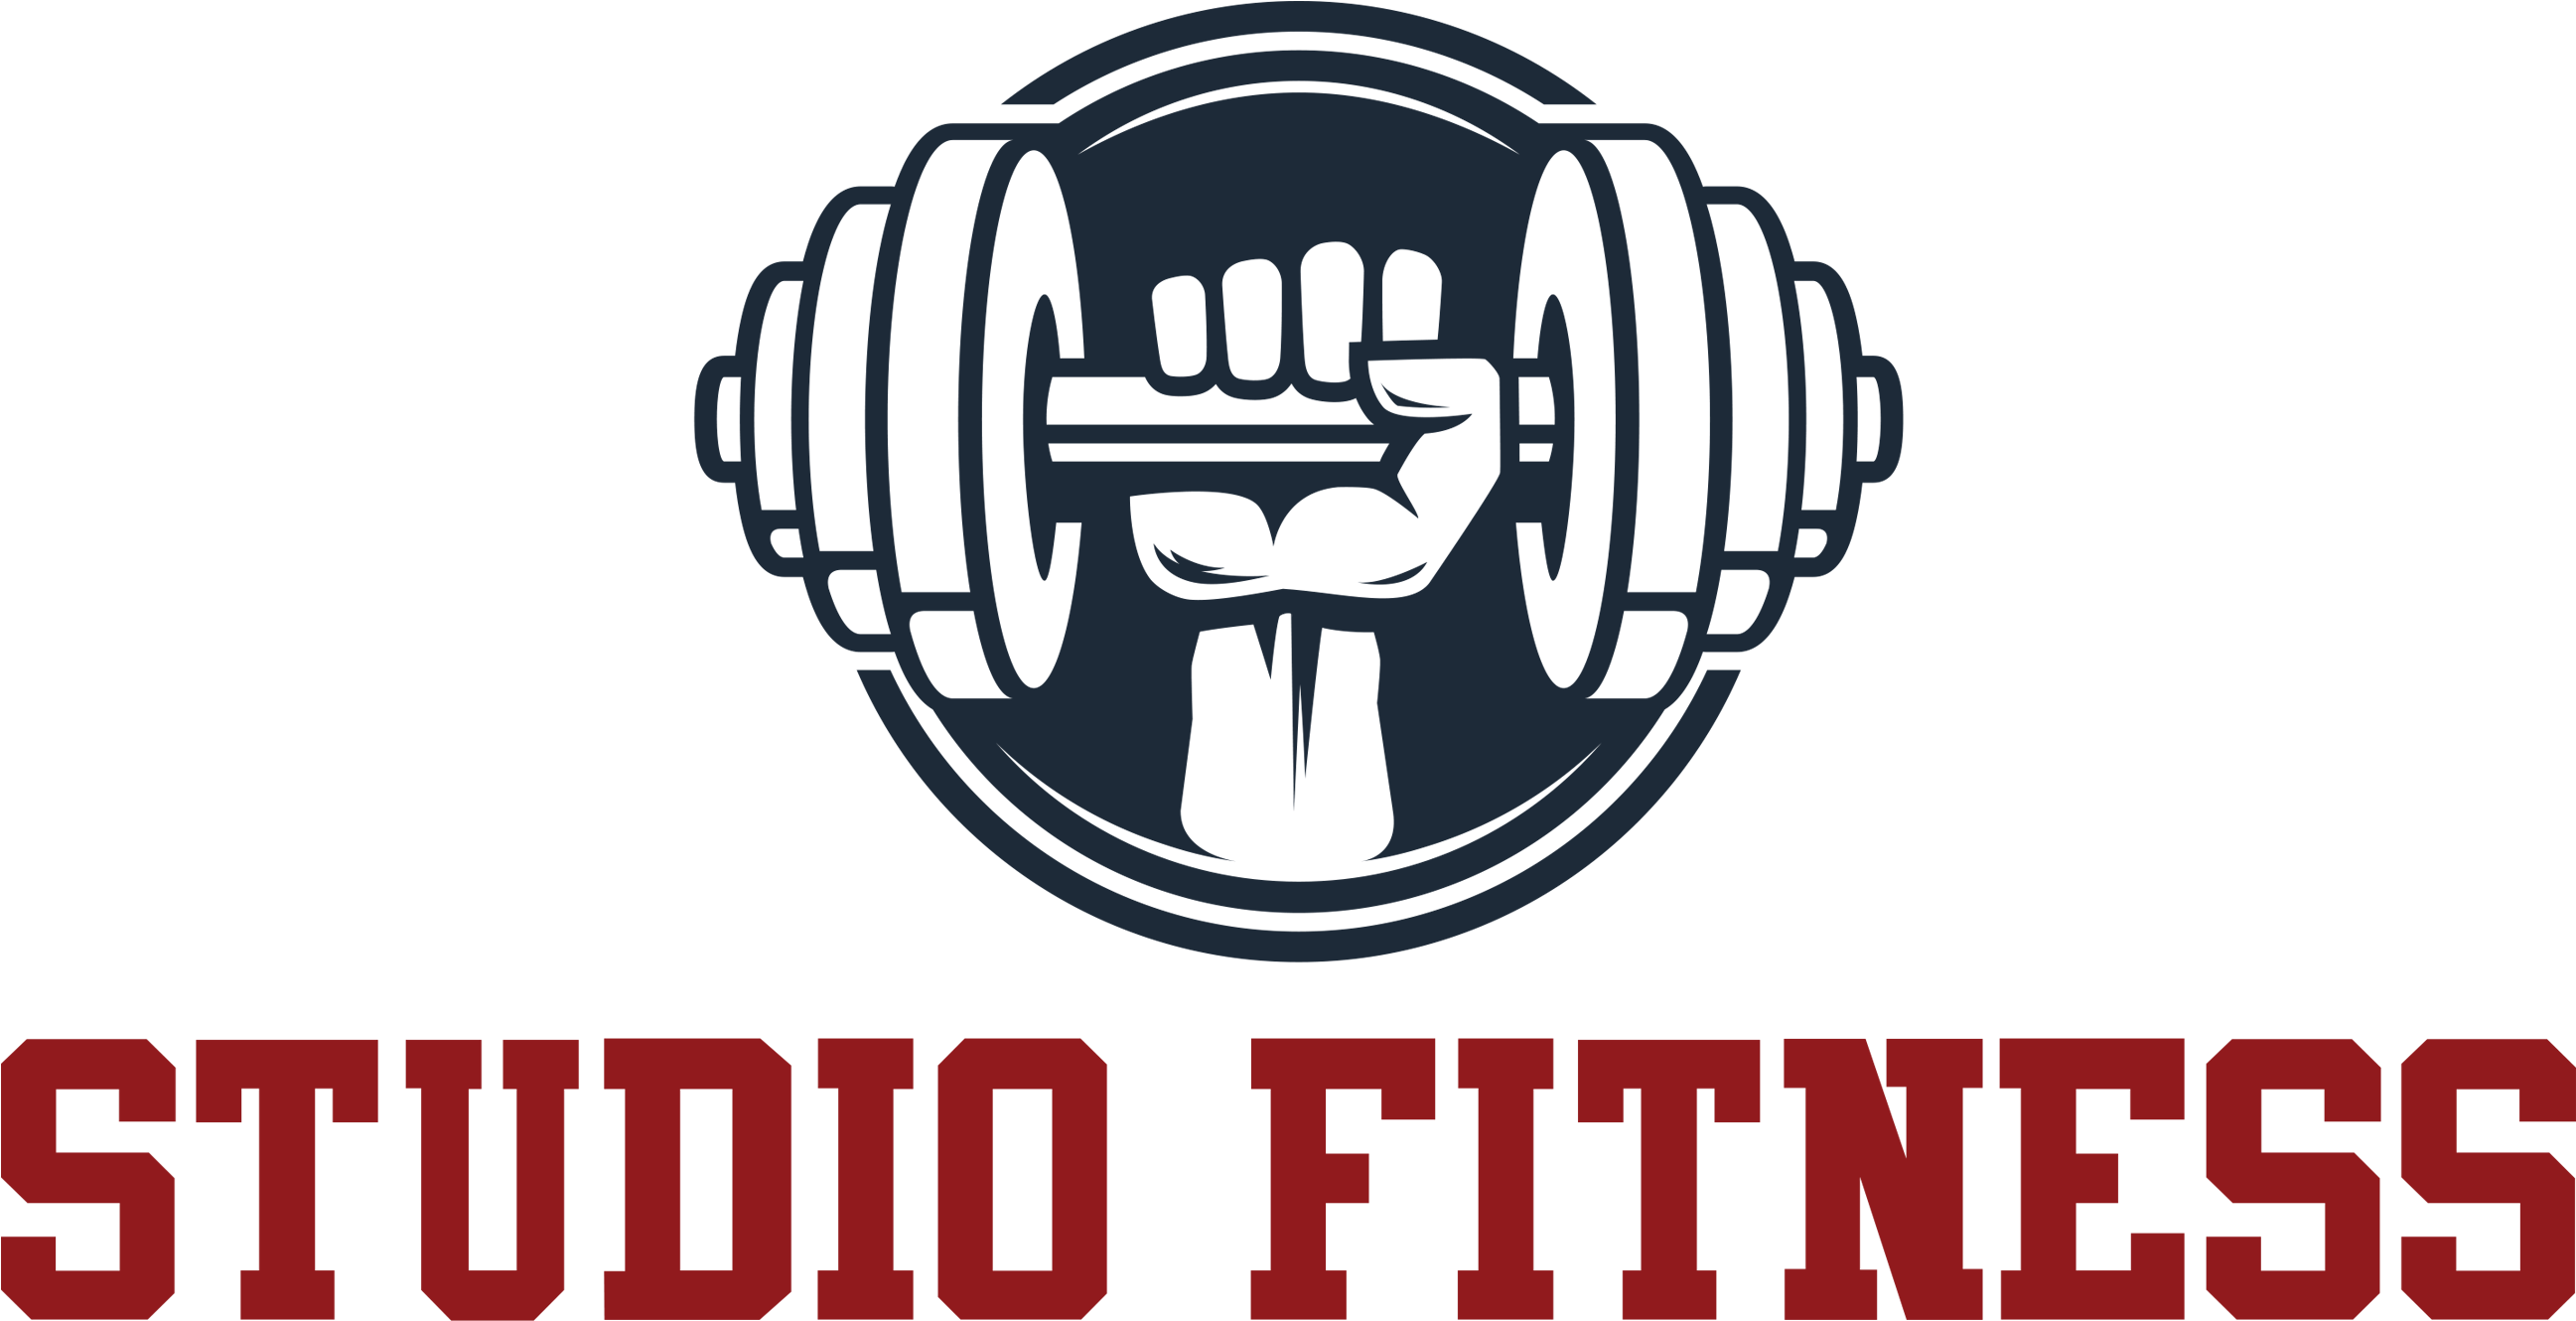 Studio Fitness - Physical Fitness, Hd Png Download